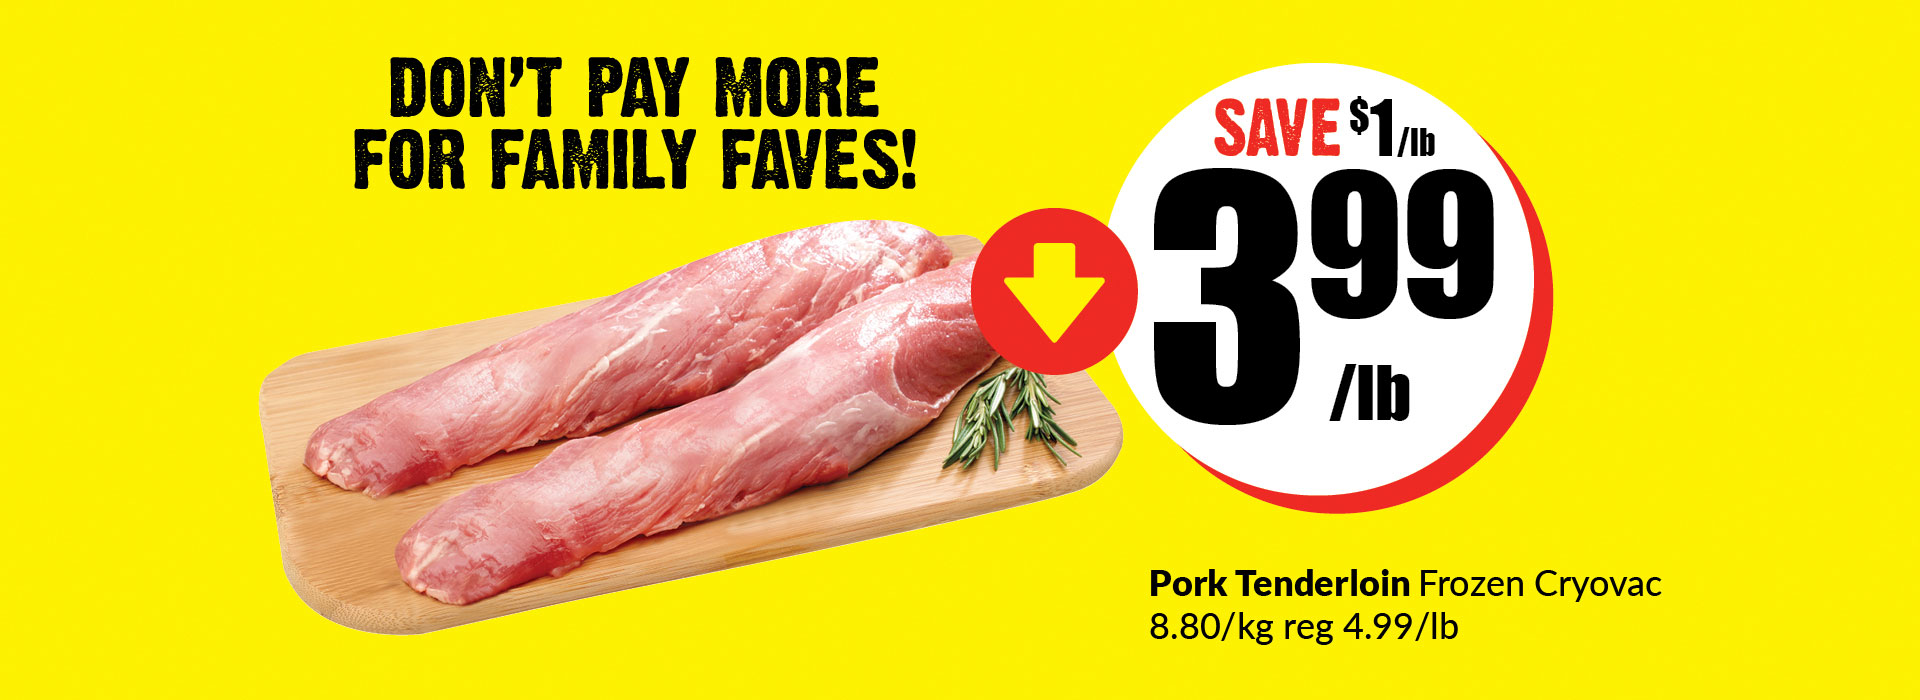 Text Reading ‘Don’t Pay More For Family Faves!’ at the top. Buy pork tenderloin frozen cryovac 8.80 per kilogram reg. 4.99 per pound only at $3.99 per pound and save up to $1 per pound.'